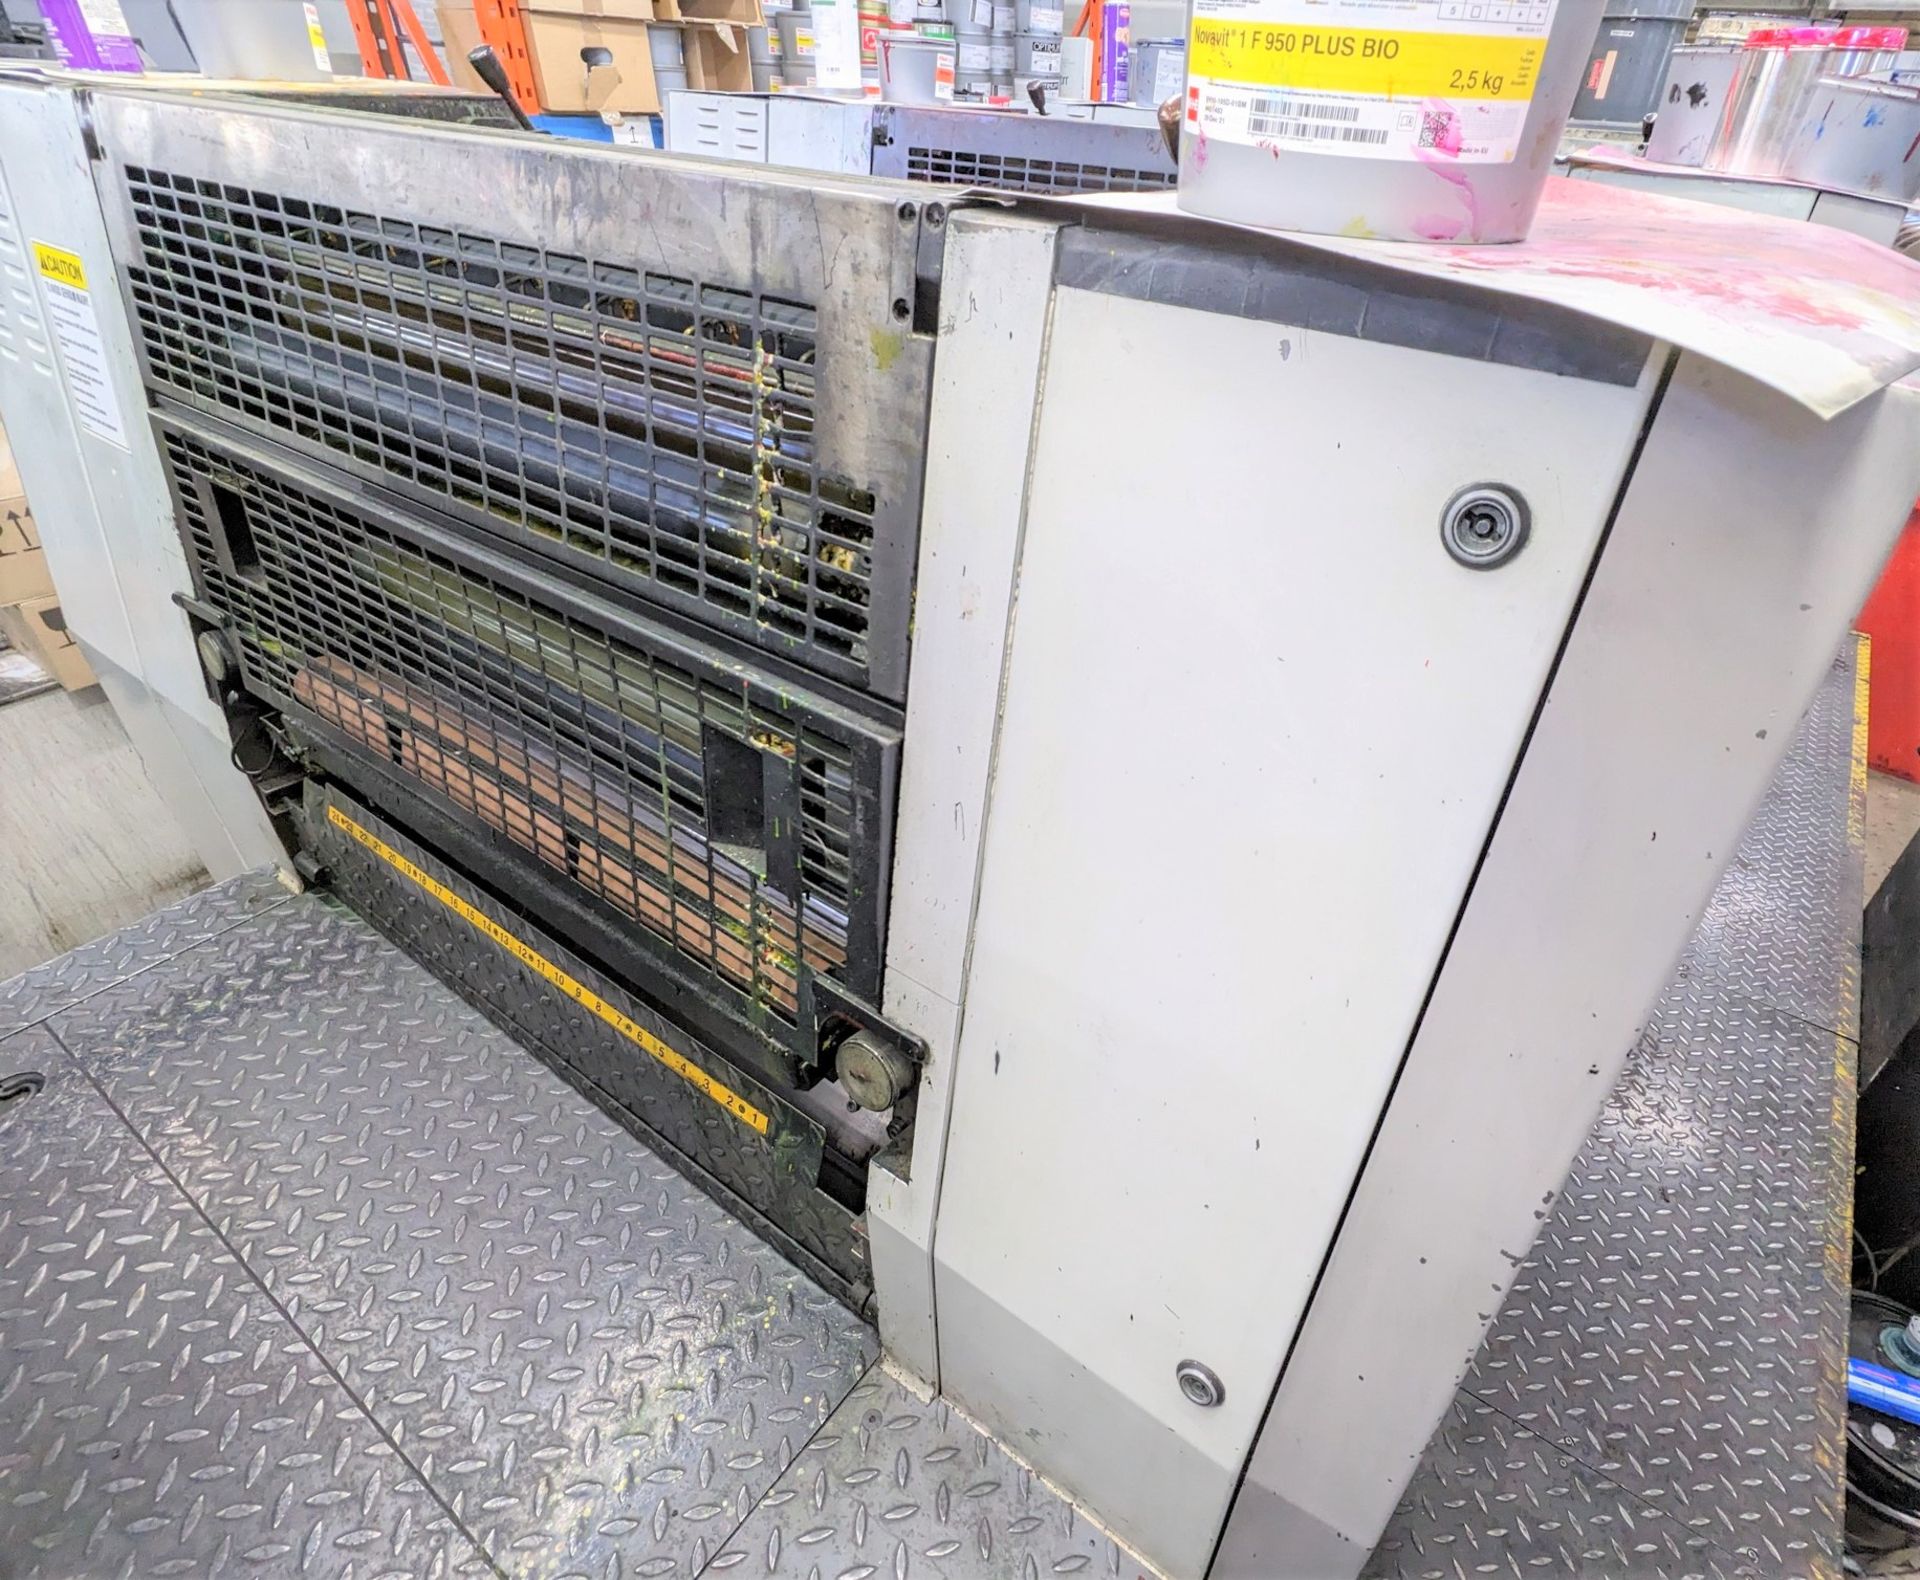 1995 MAN ROLAND 300 6-COLOUR OFFSET PRINTING PRESS, MODEL R306, S/N 25152B, TOTAL SHEET COUNT - Image 19 of 53